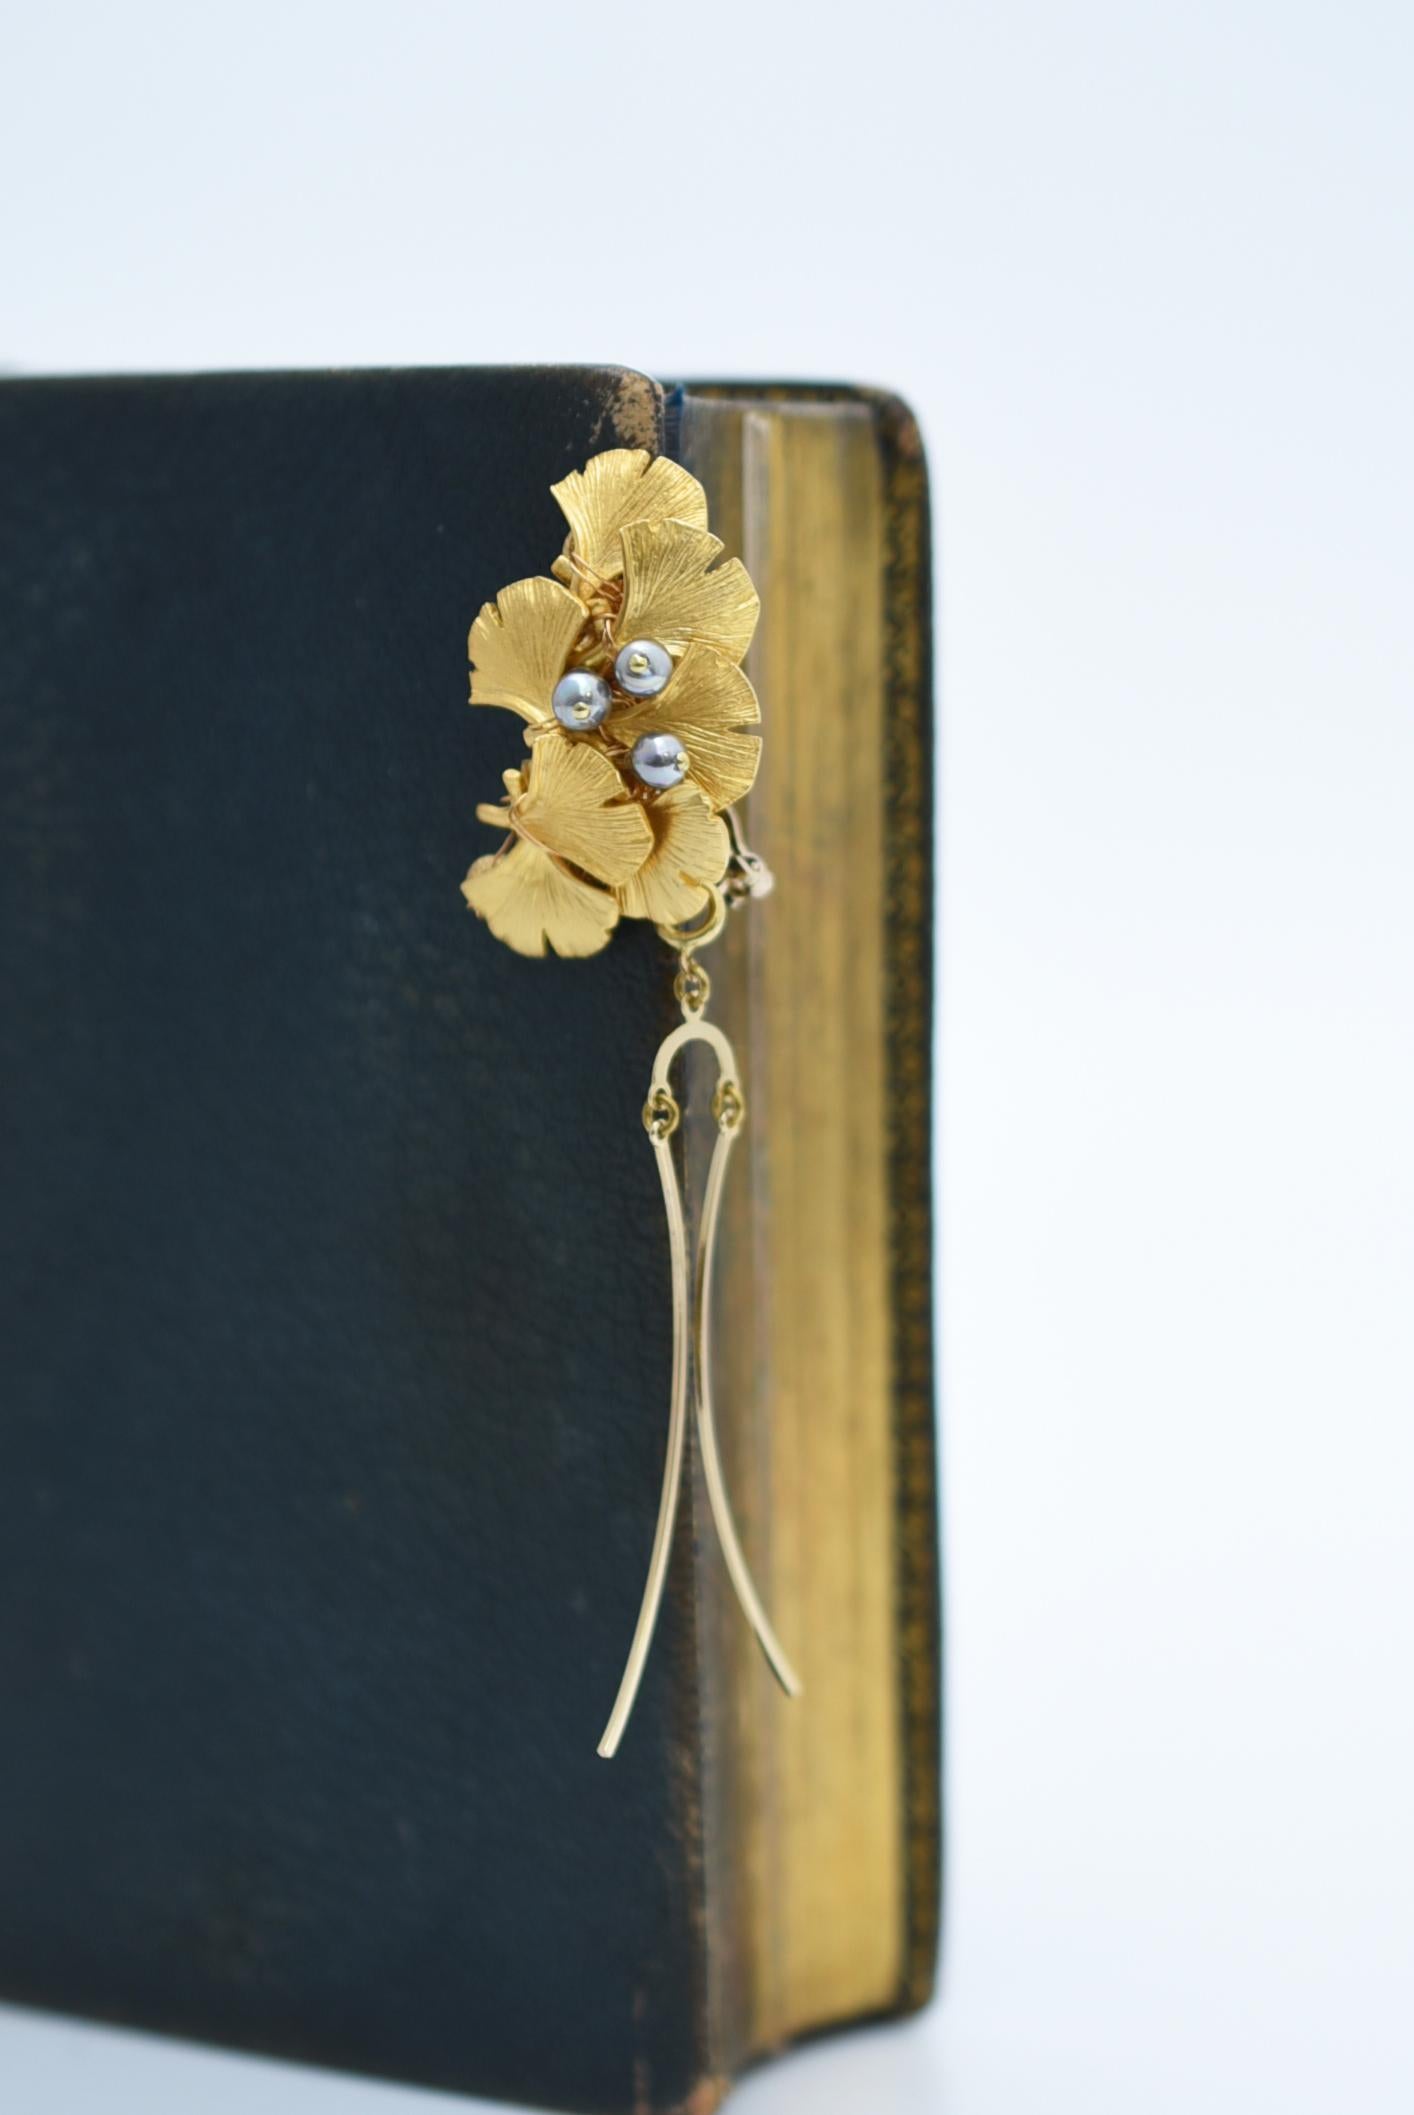 material:Brass, Vintage 1970s Japanese glass pearls, glass beads
size:length 7.5cm

An ear clip with several small ginkgo trees overlapping each other, like an autumn leafed ginkgo tree itself. The leaflets are designed to come down on either the